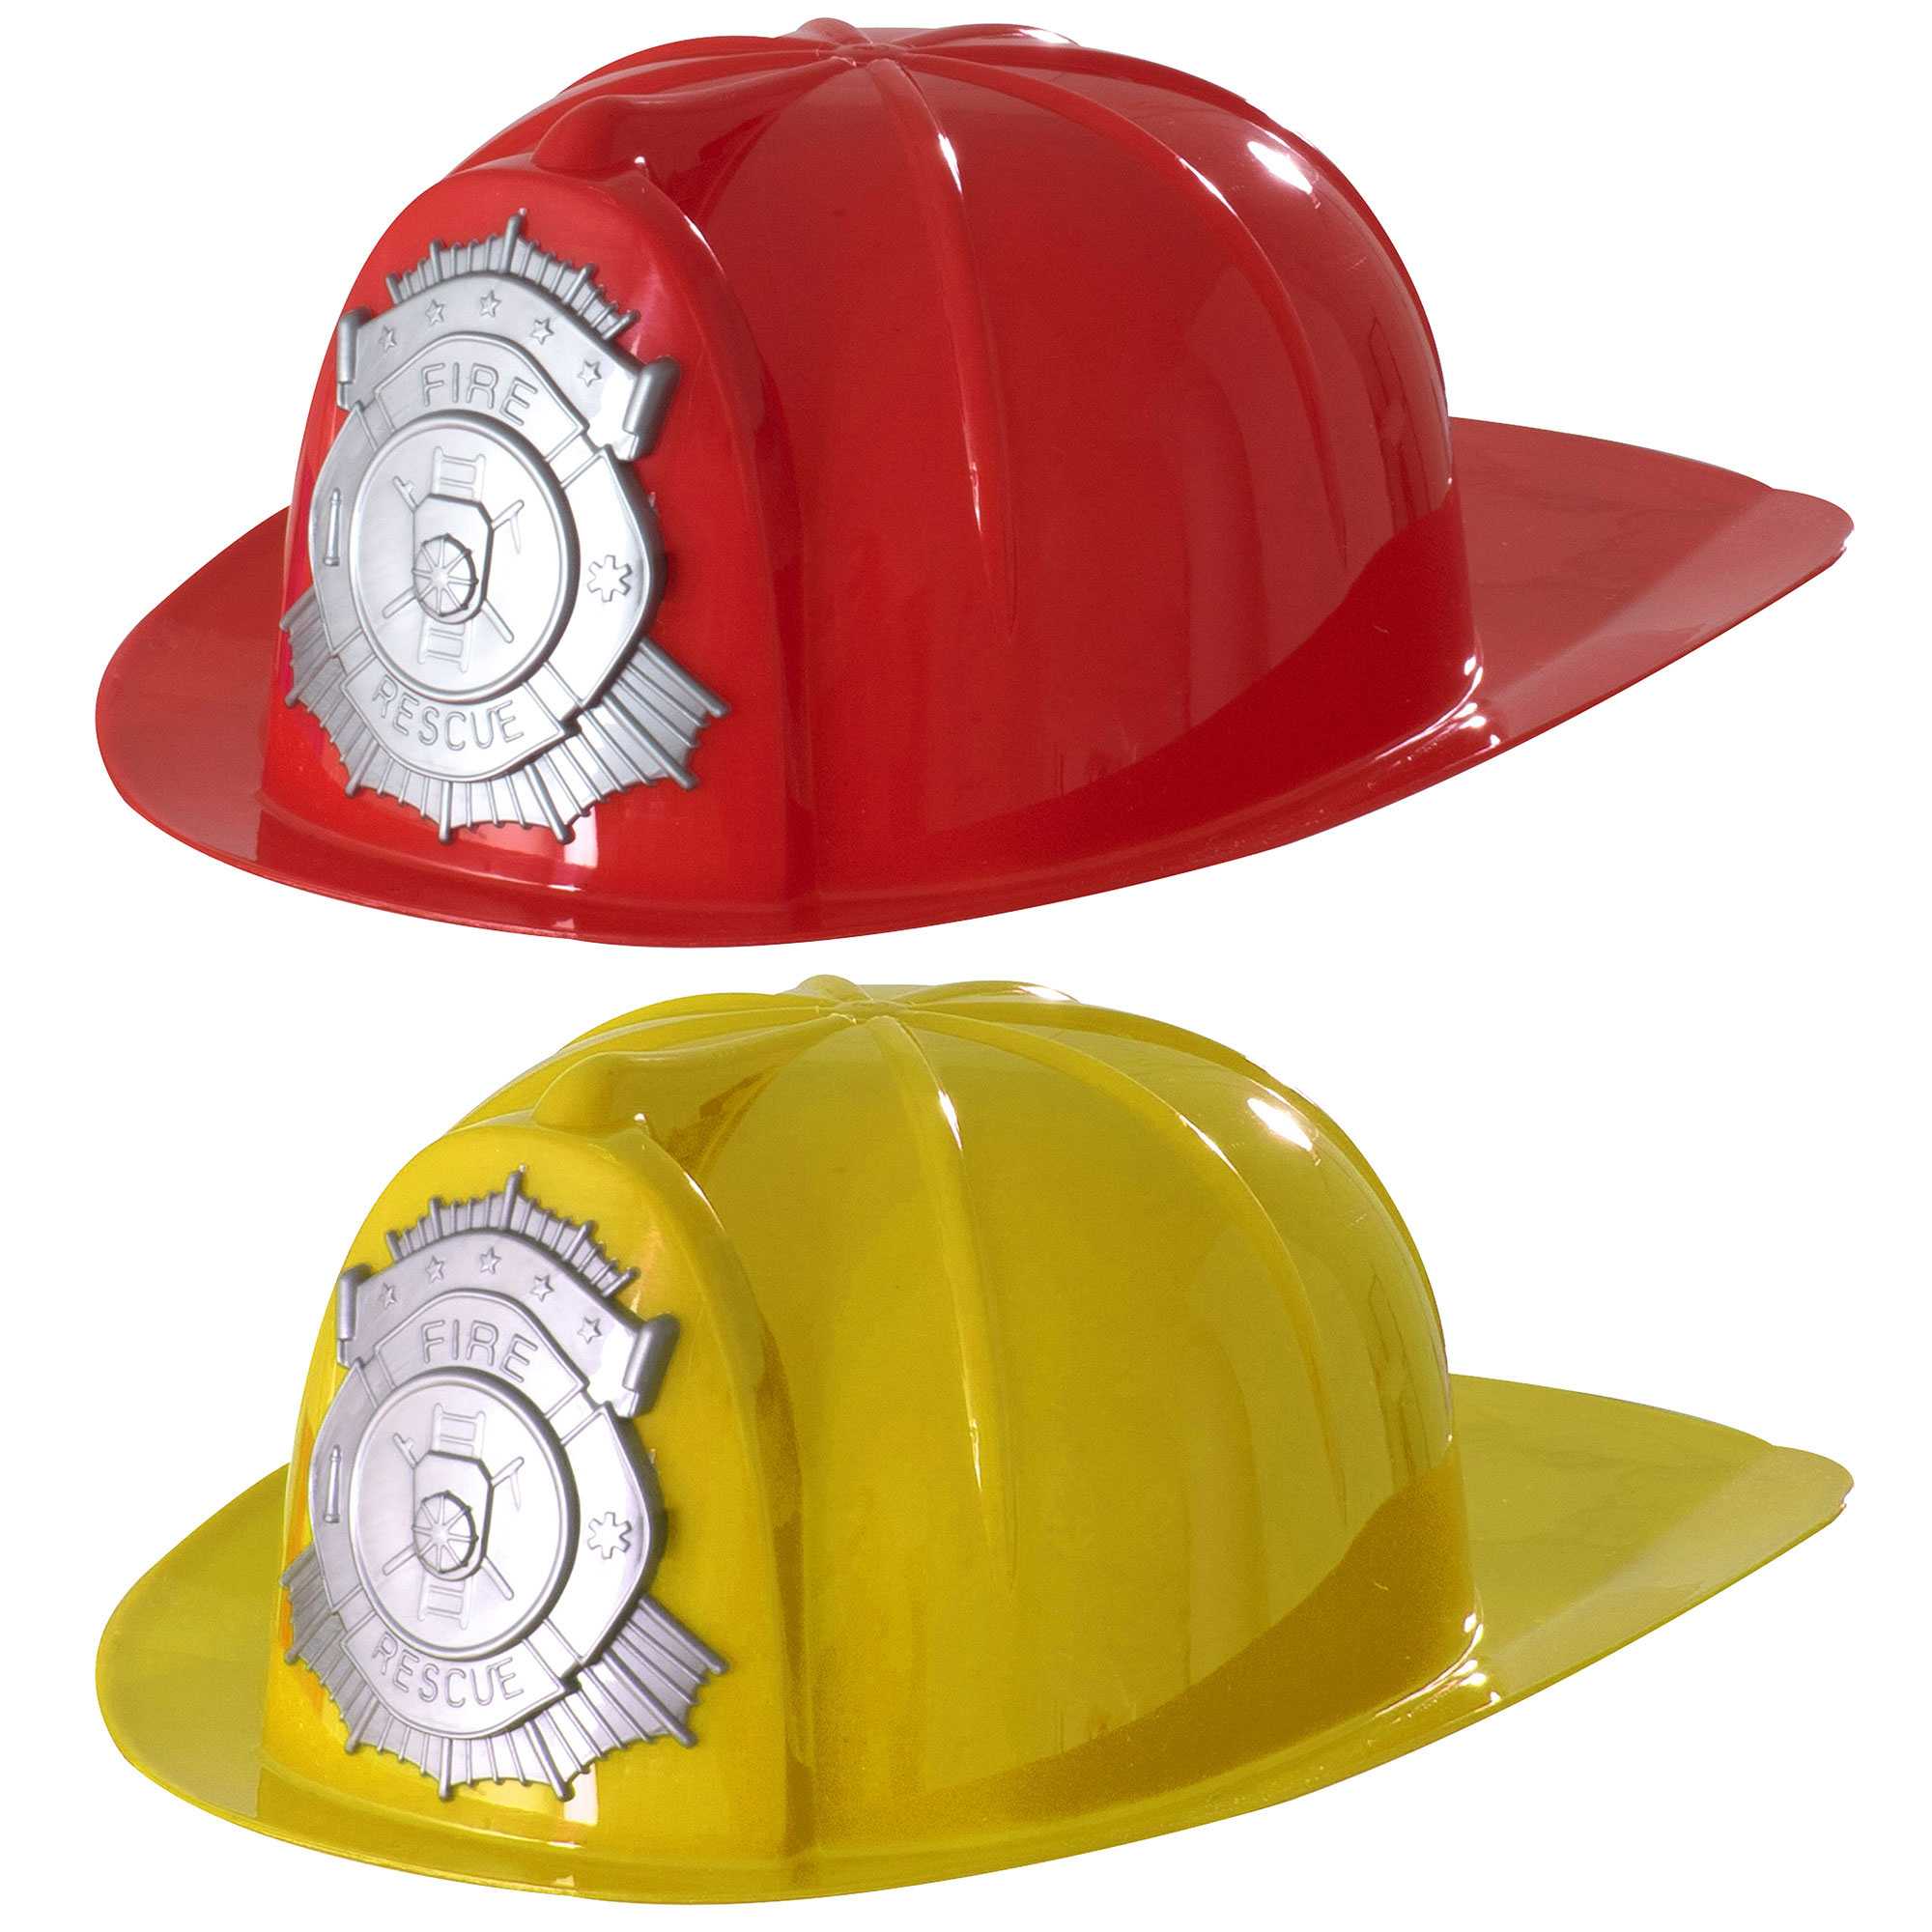 Image of Childrens Fancy Dress Fireman Hats - Pack of 2